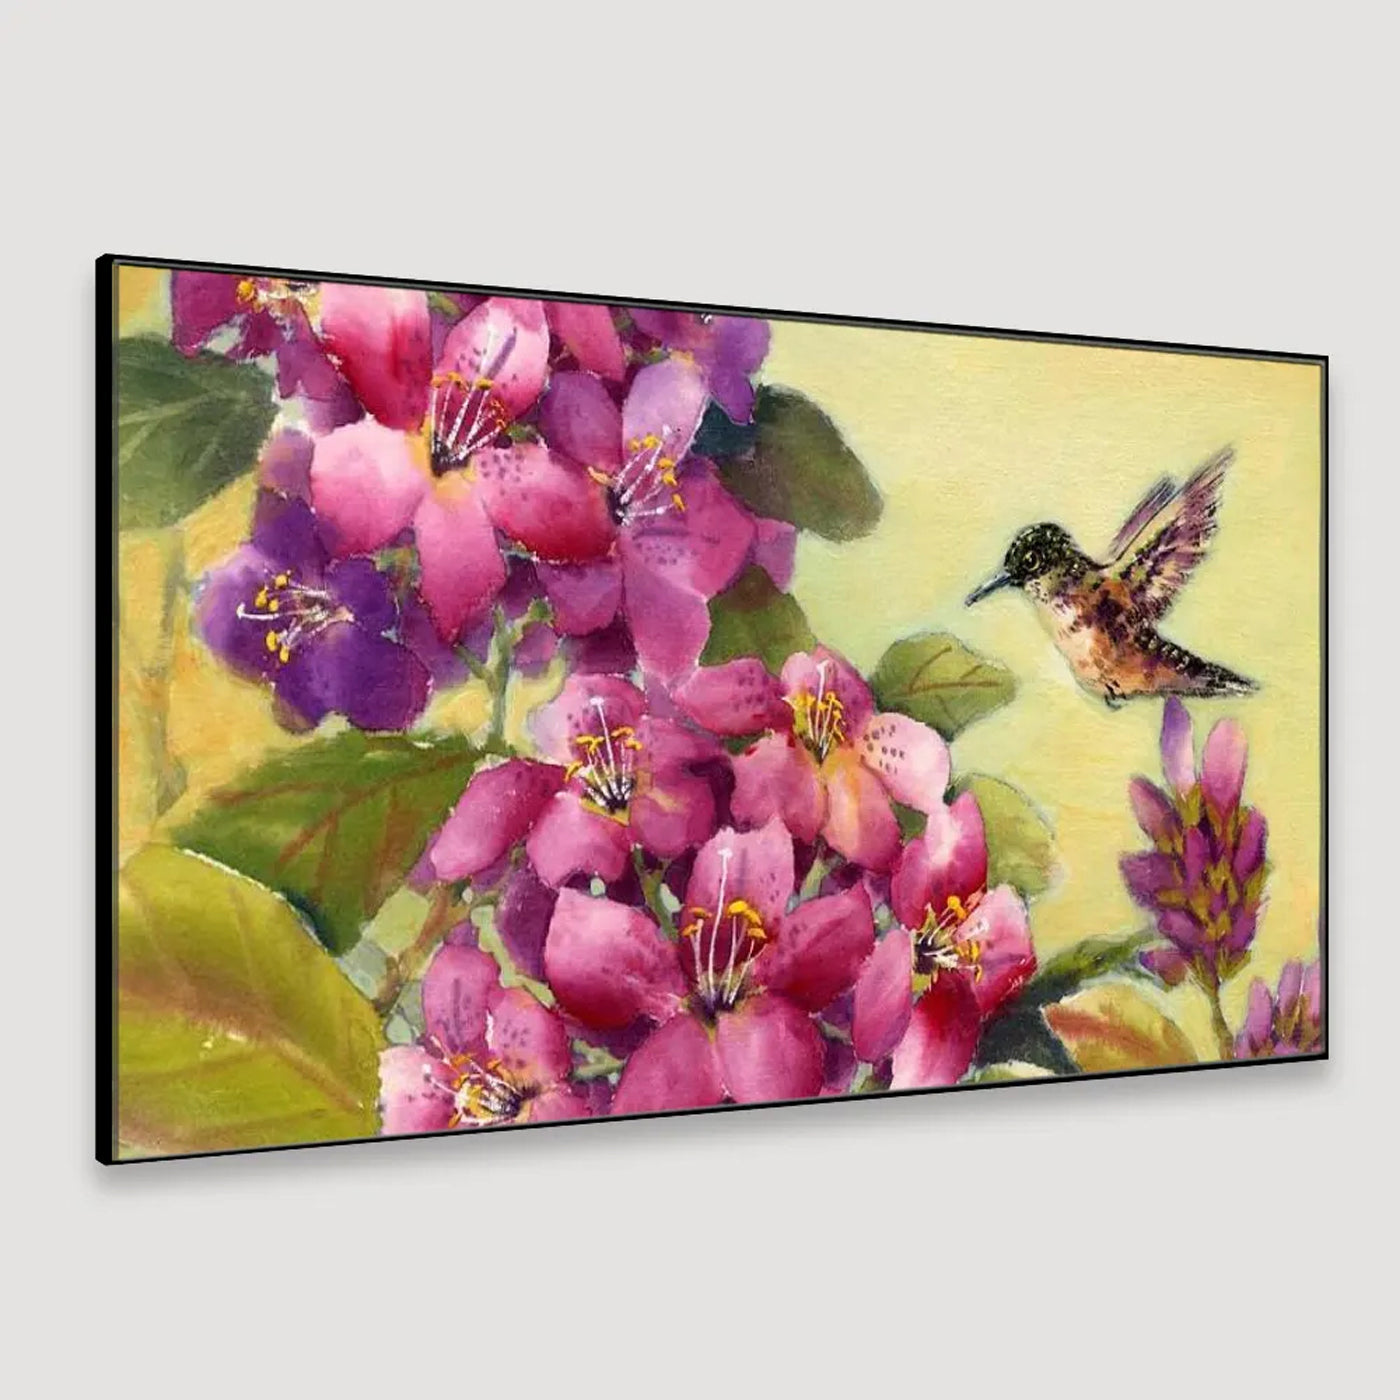 Harmony of Nature: Big Panoramic Flower Bunch and Hummingbird Wall Painting with Frame ( 48 x 24 ) Inch